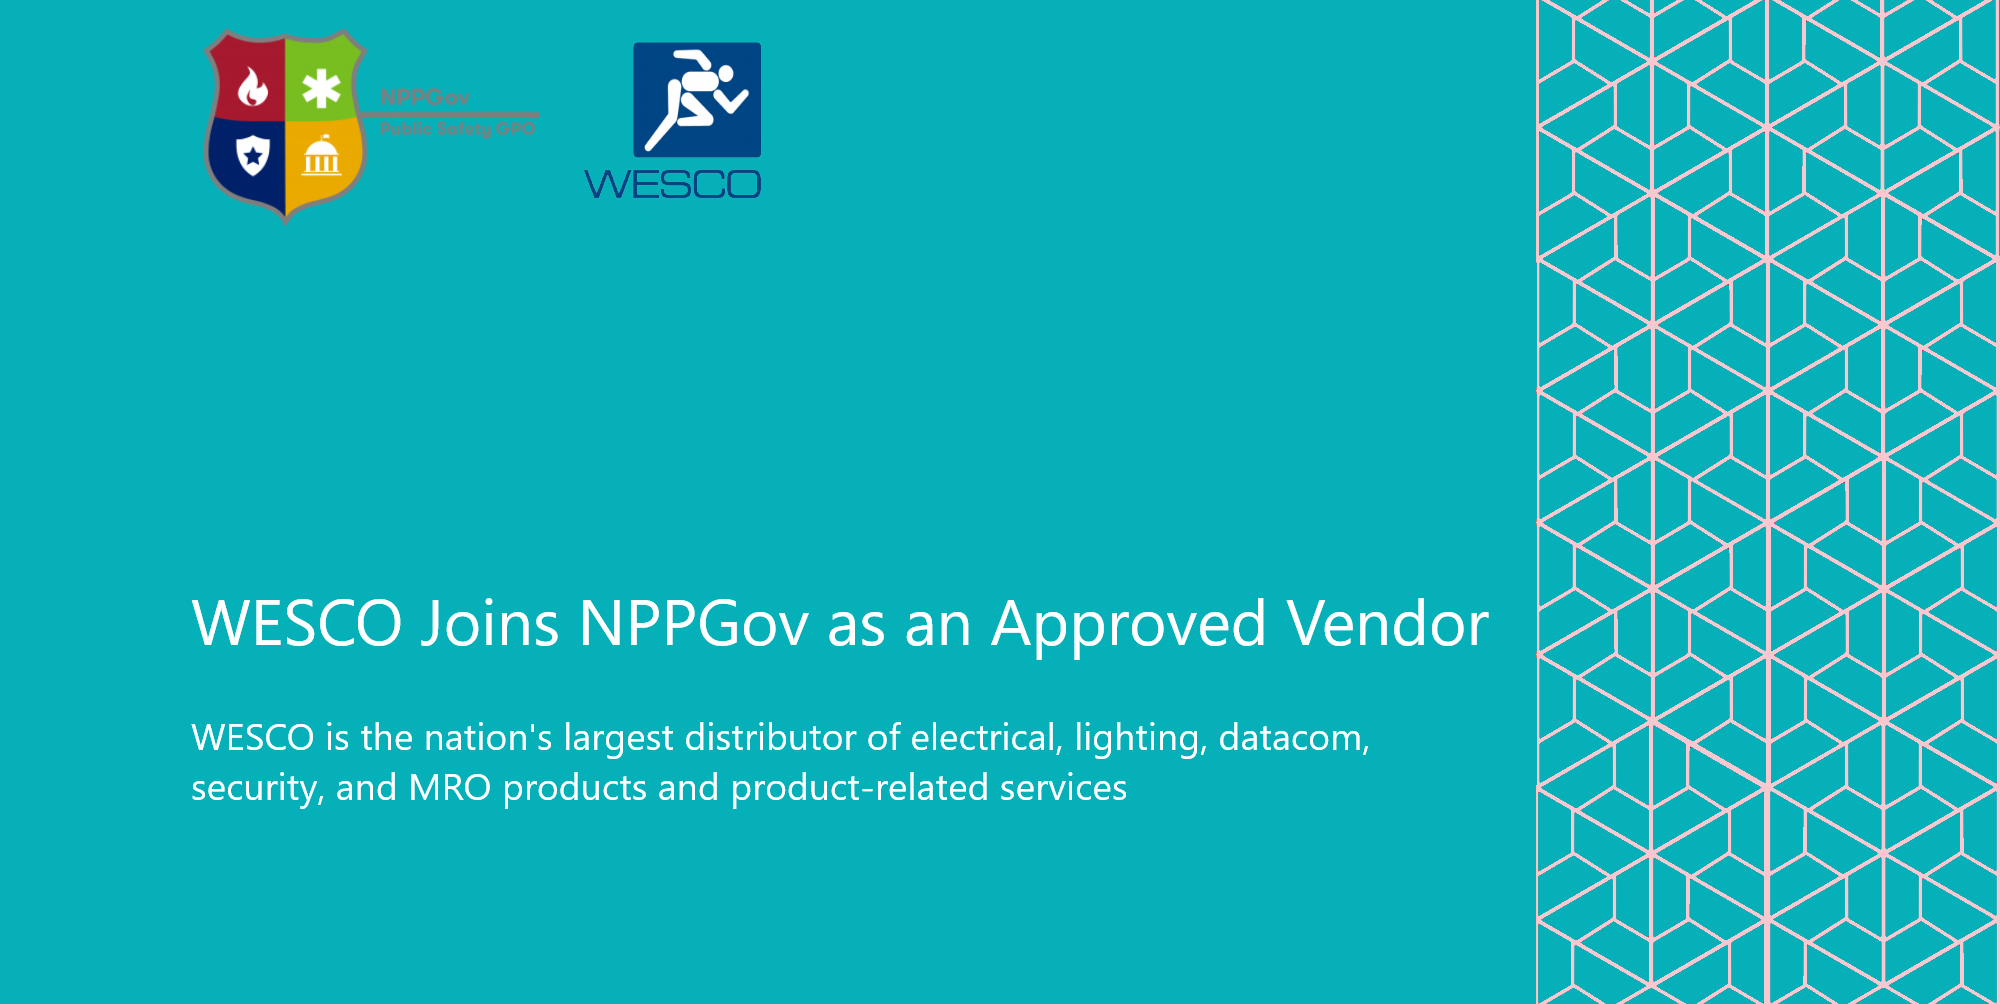 WESCO Joins NPPGov as an Approved Vendor